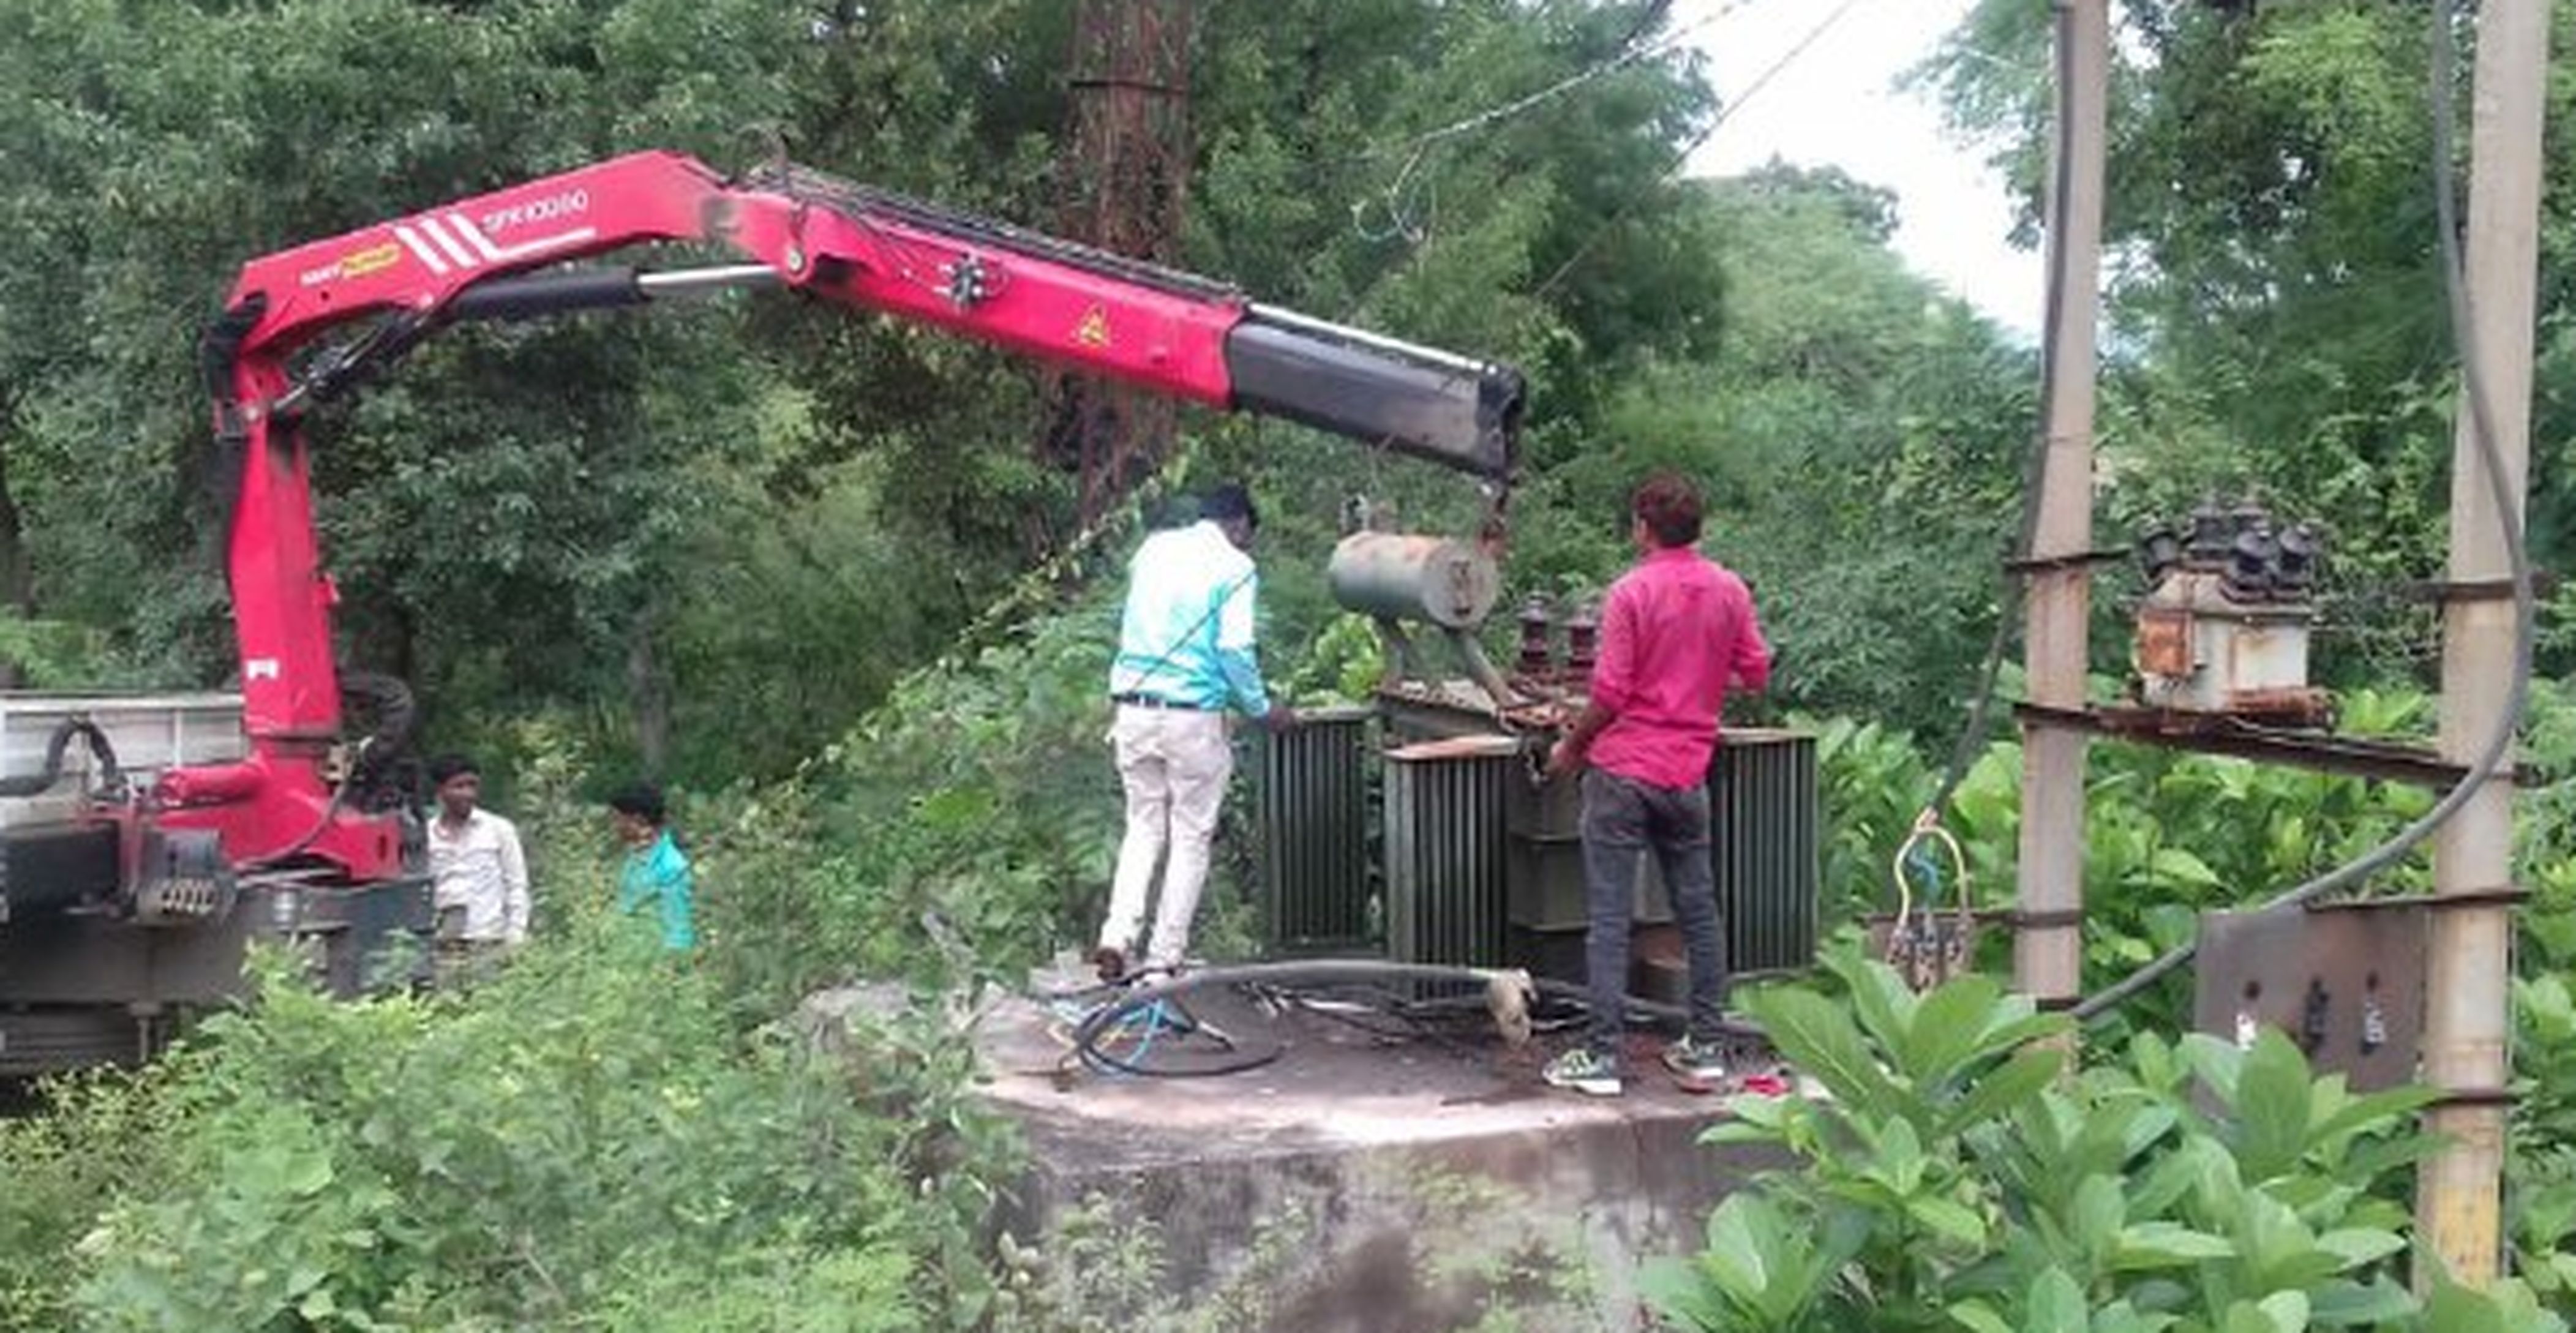 City took 17 hours to correct transformer, people wandering for water